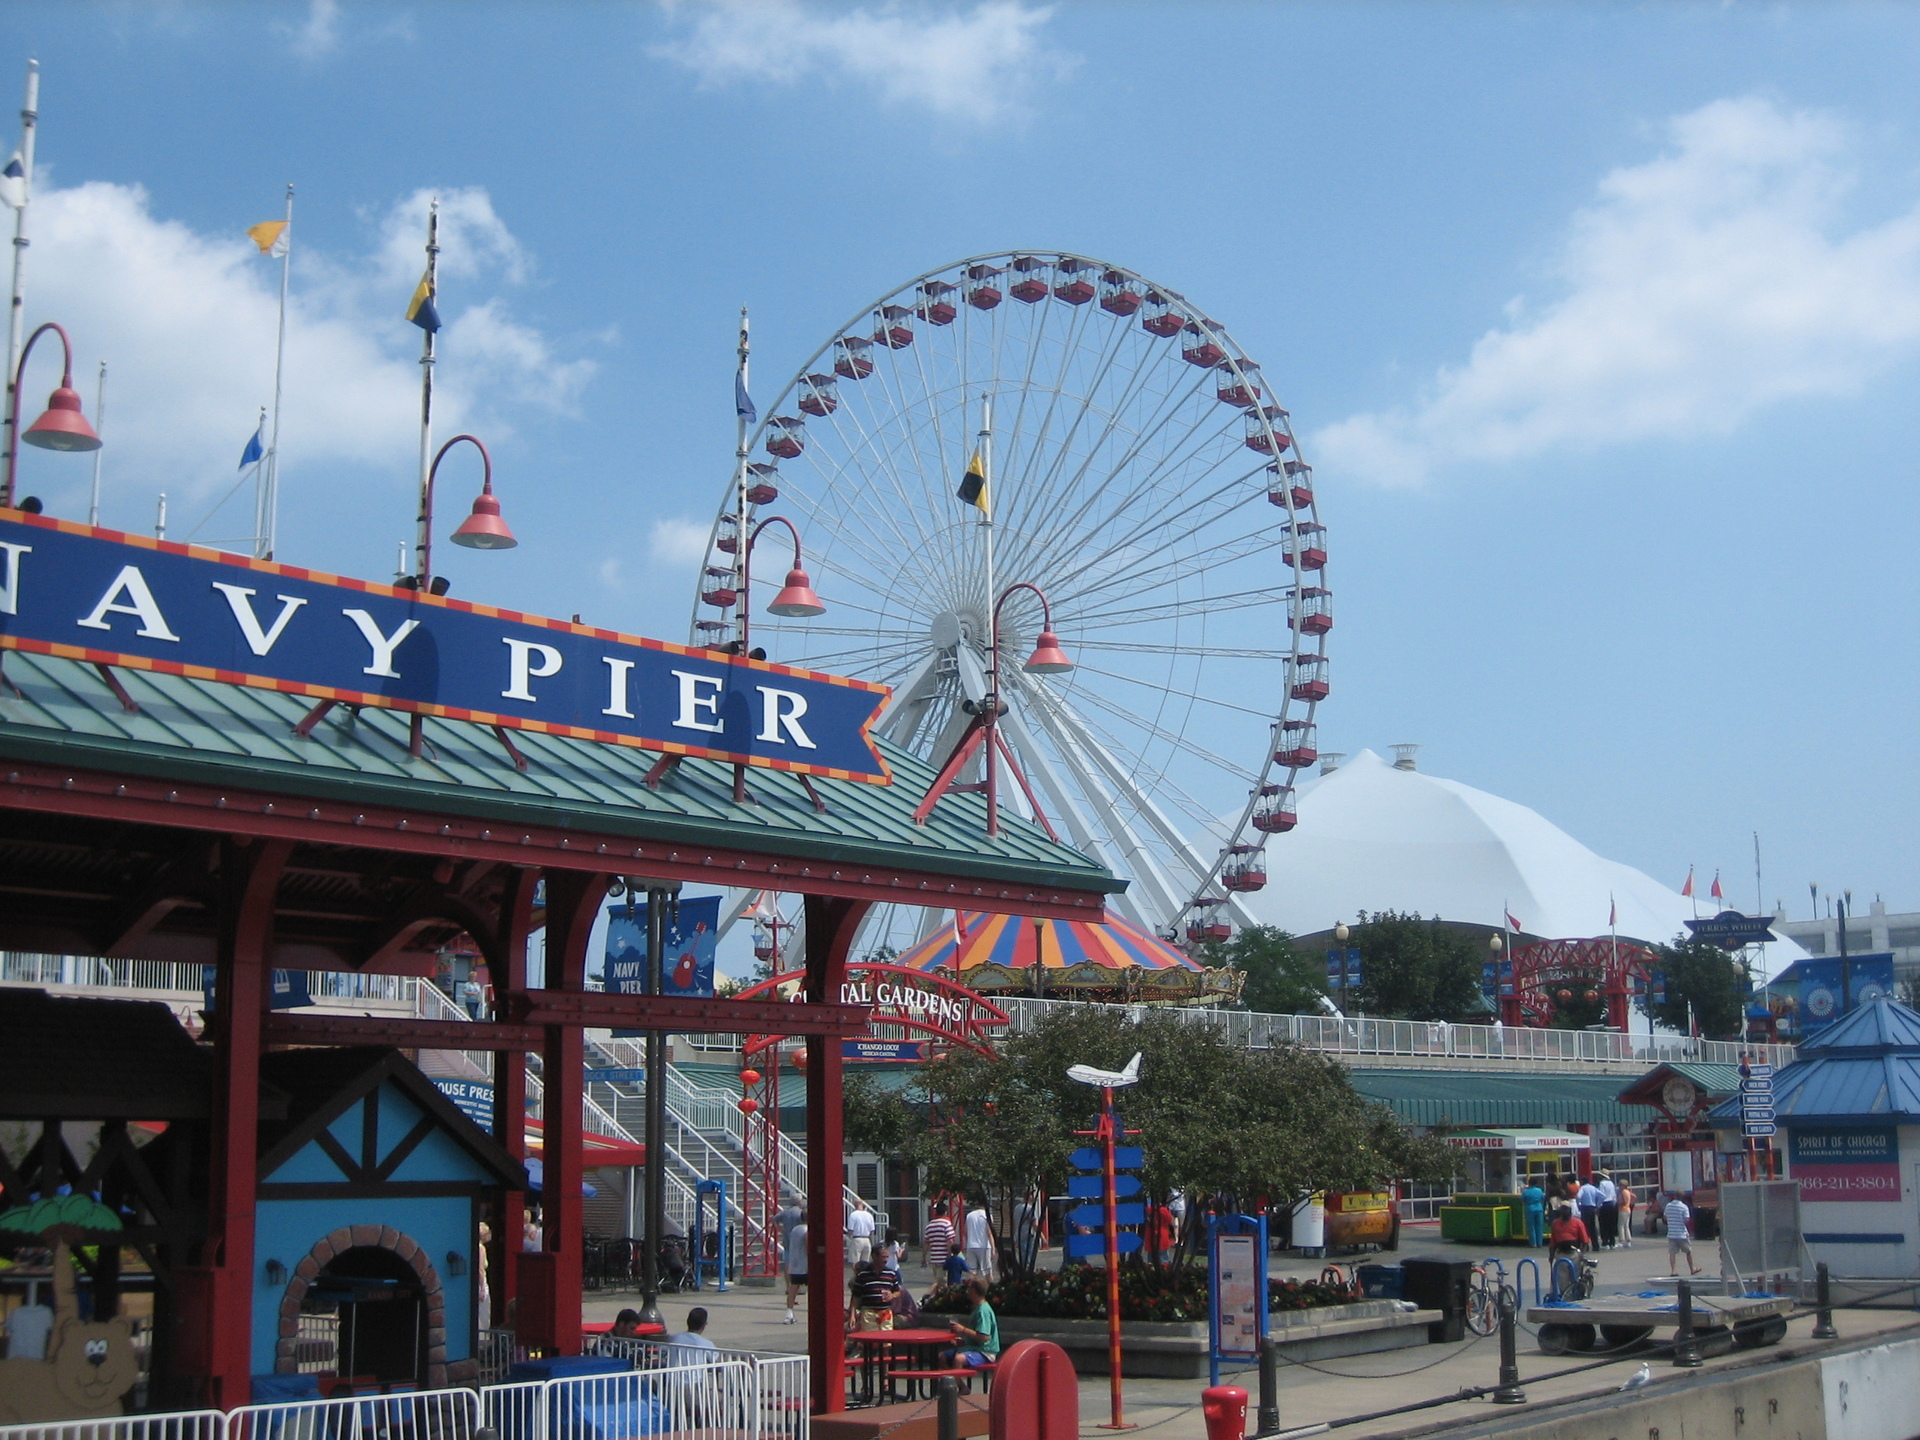 Chicago Image Navy Pier HD Wallpaper And Background Photos